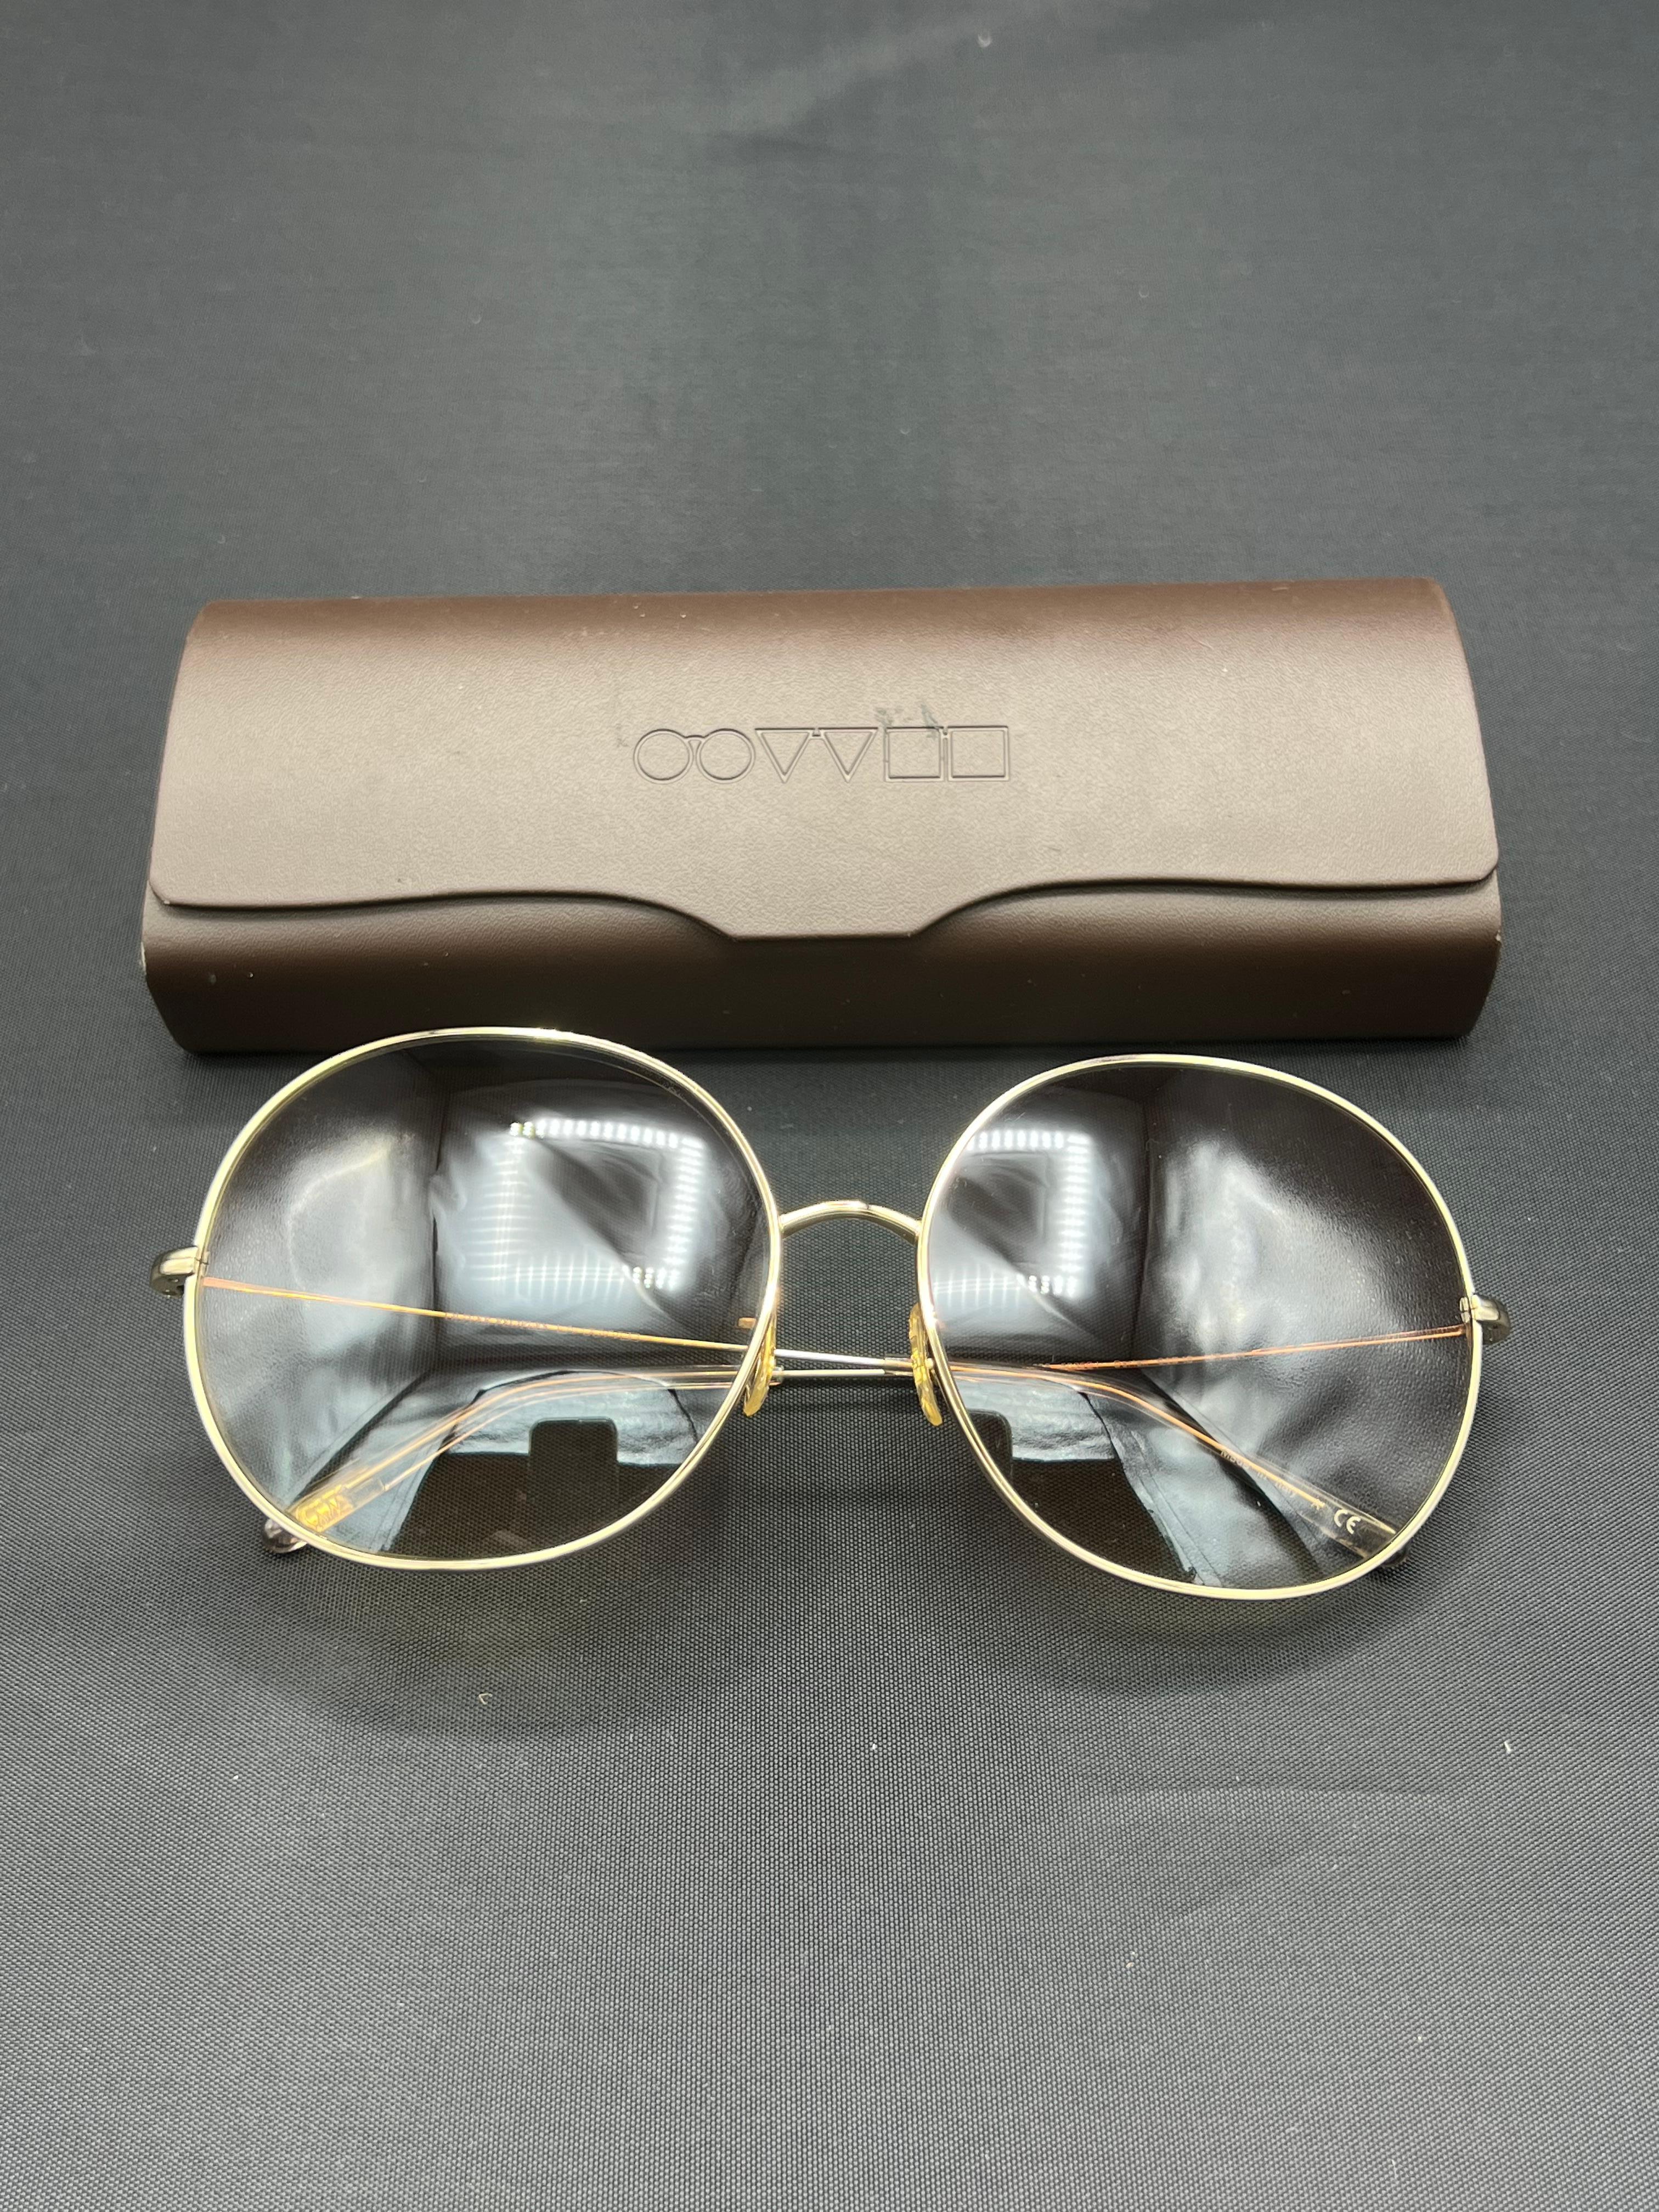 Oliver Peoples Darien Brown Round Sunglasses w/ Case For Sale 4